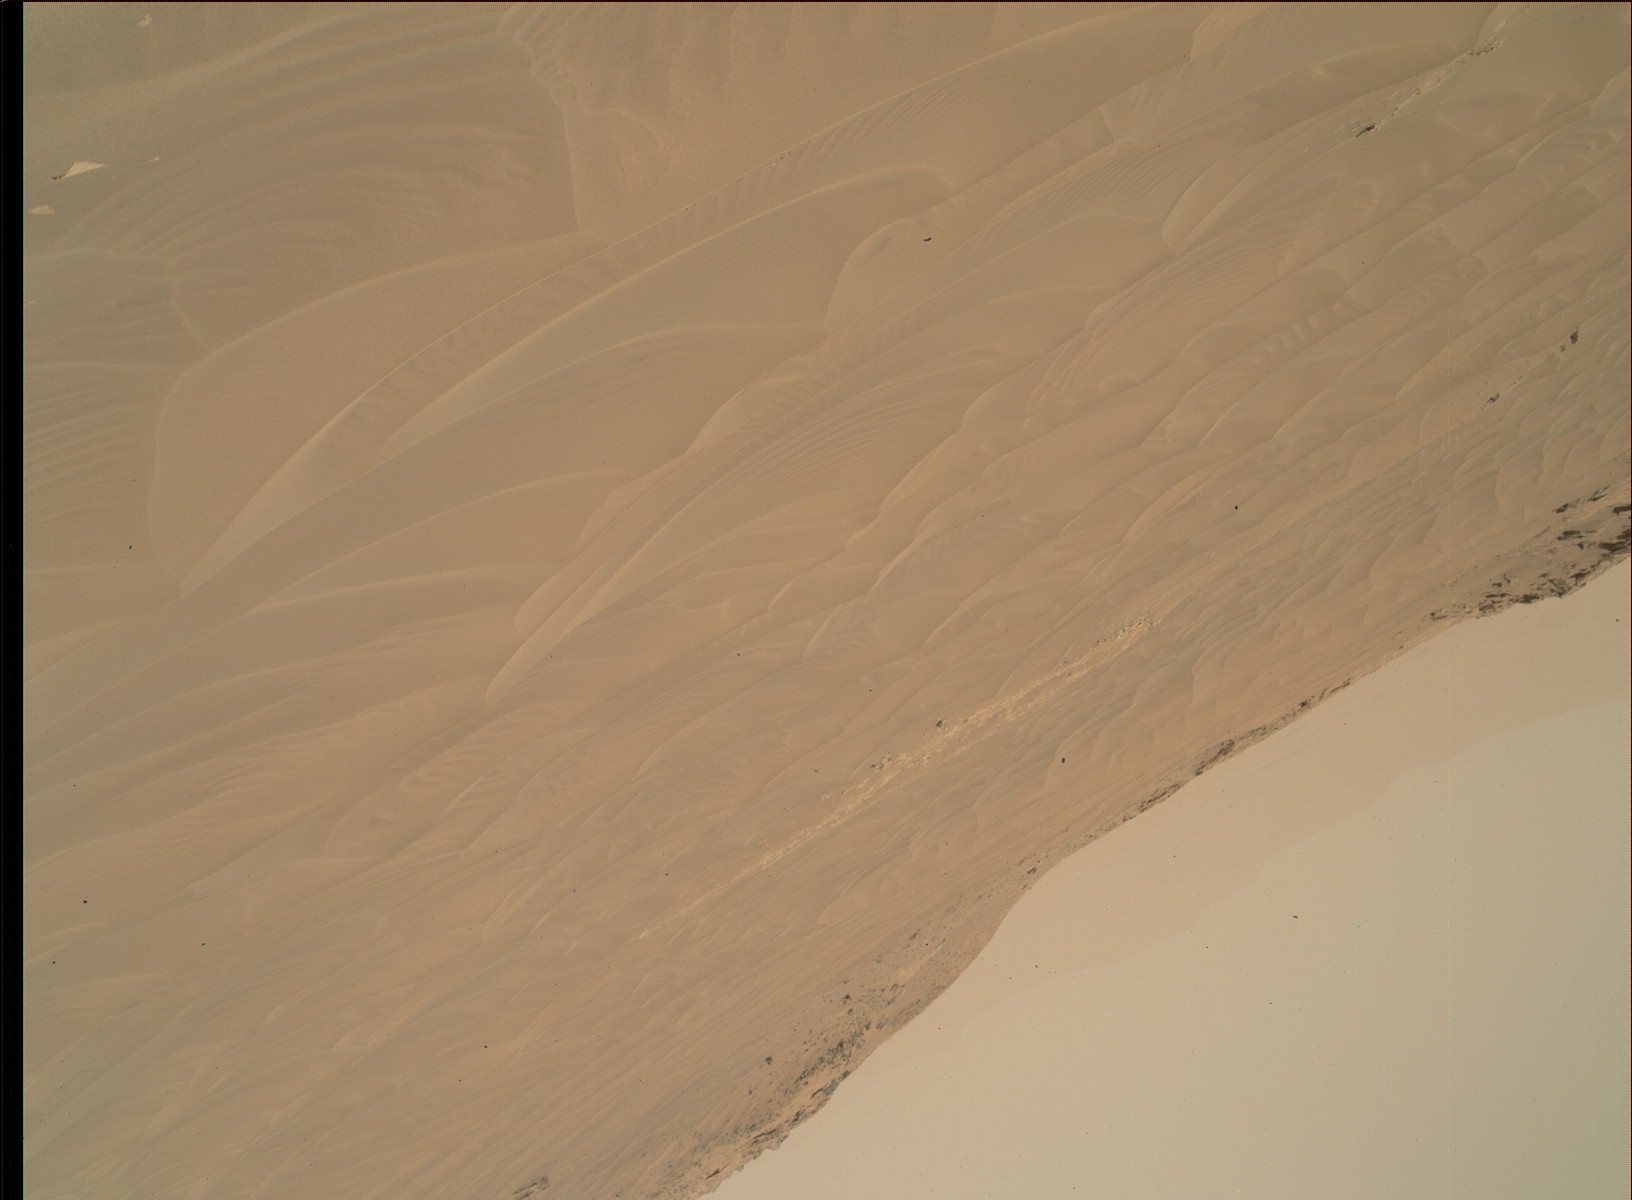 Nasa's Mars rover Curiosity acquired this image using its Mars Hand Lens Imager (MAHLI) on Sol 753